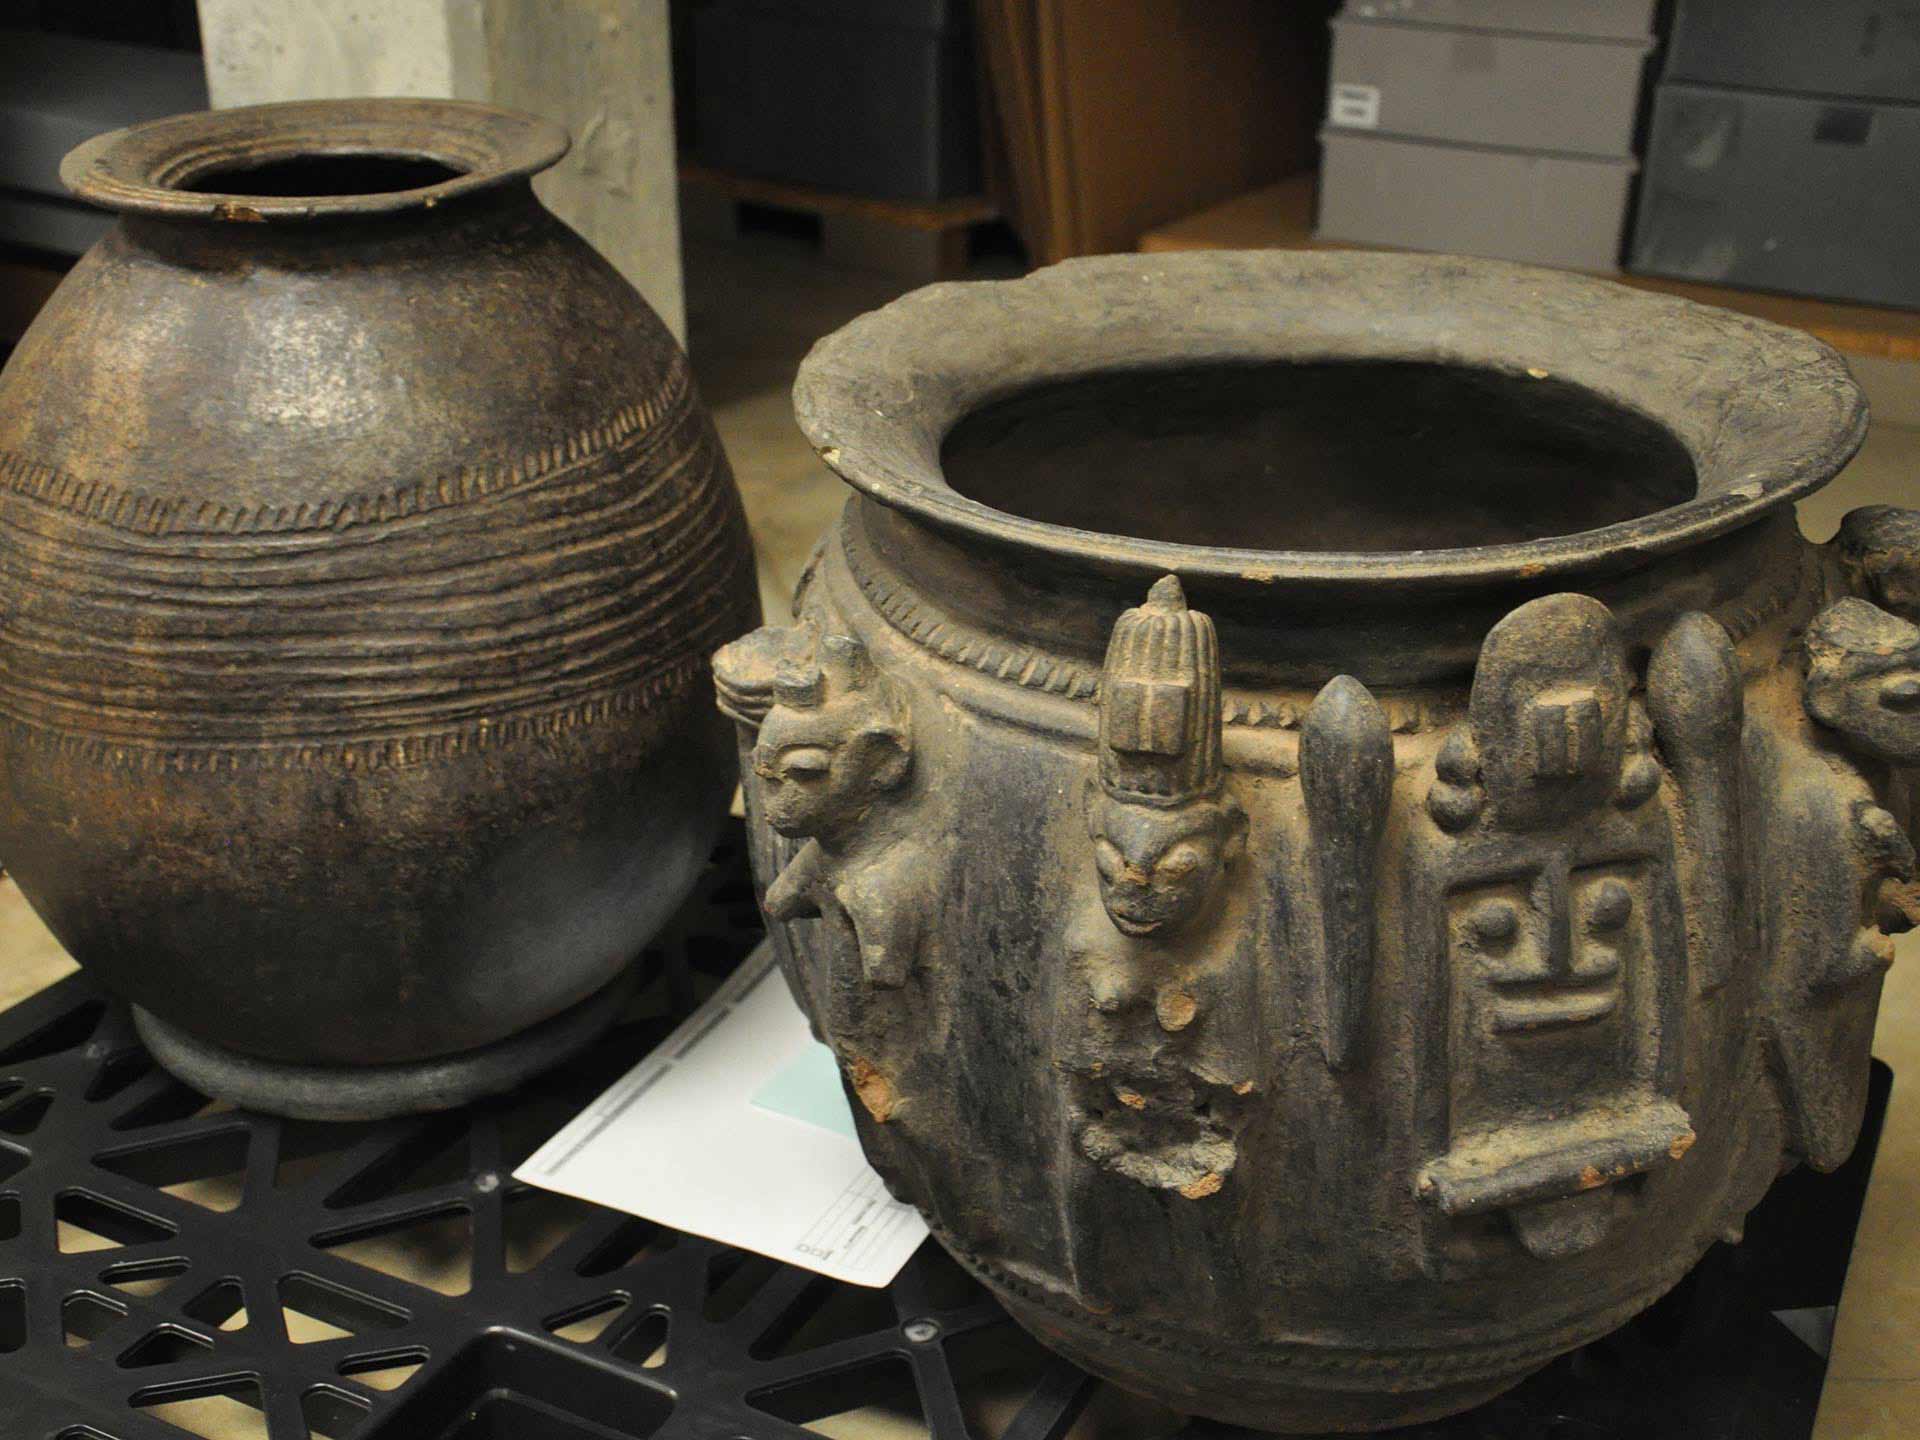 large ceramic pot with sculpted patterns and figures